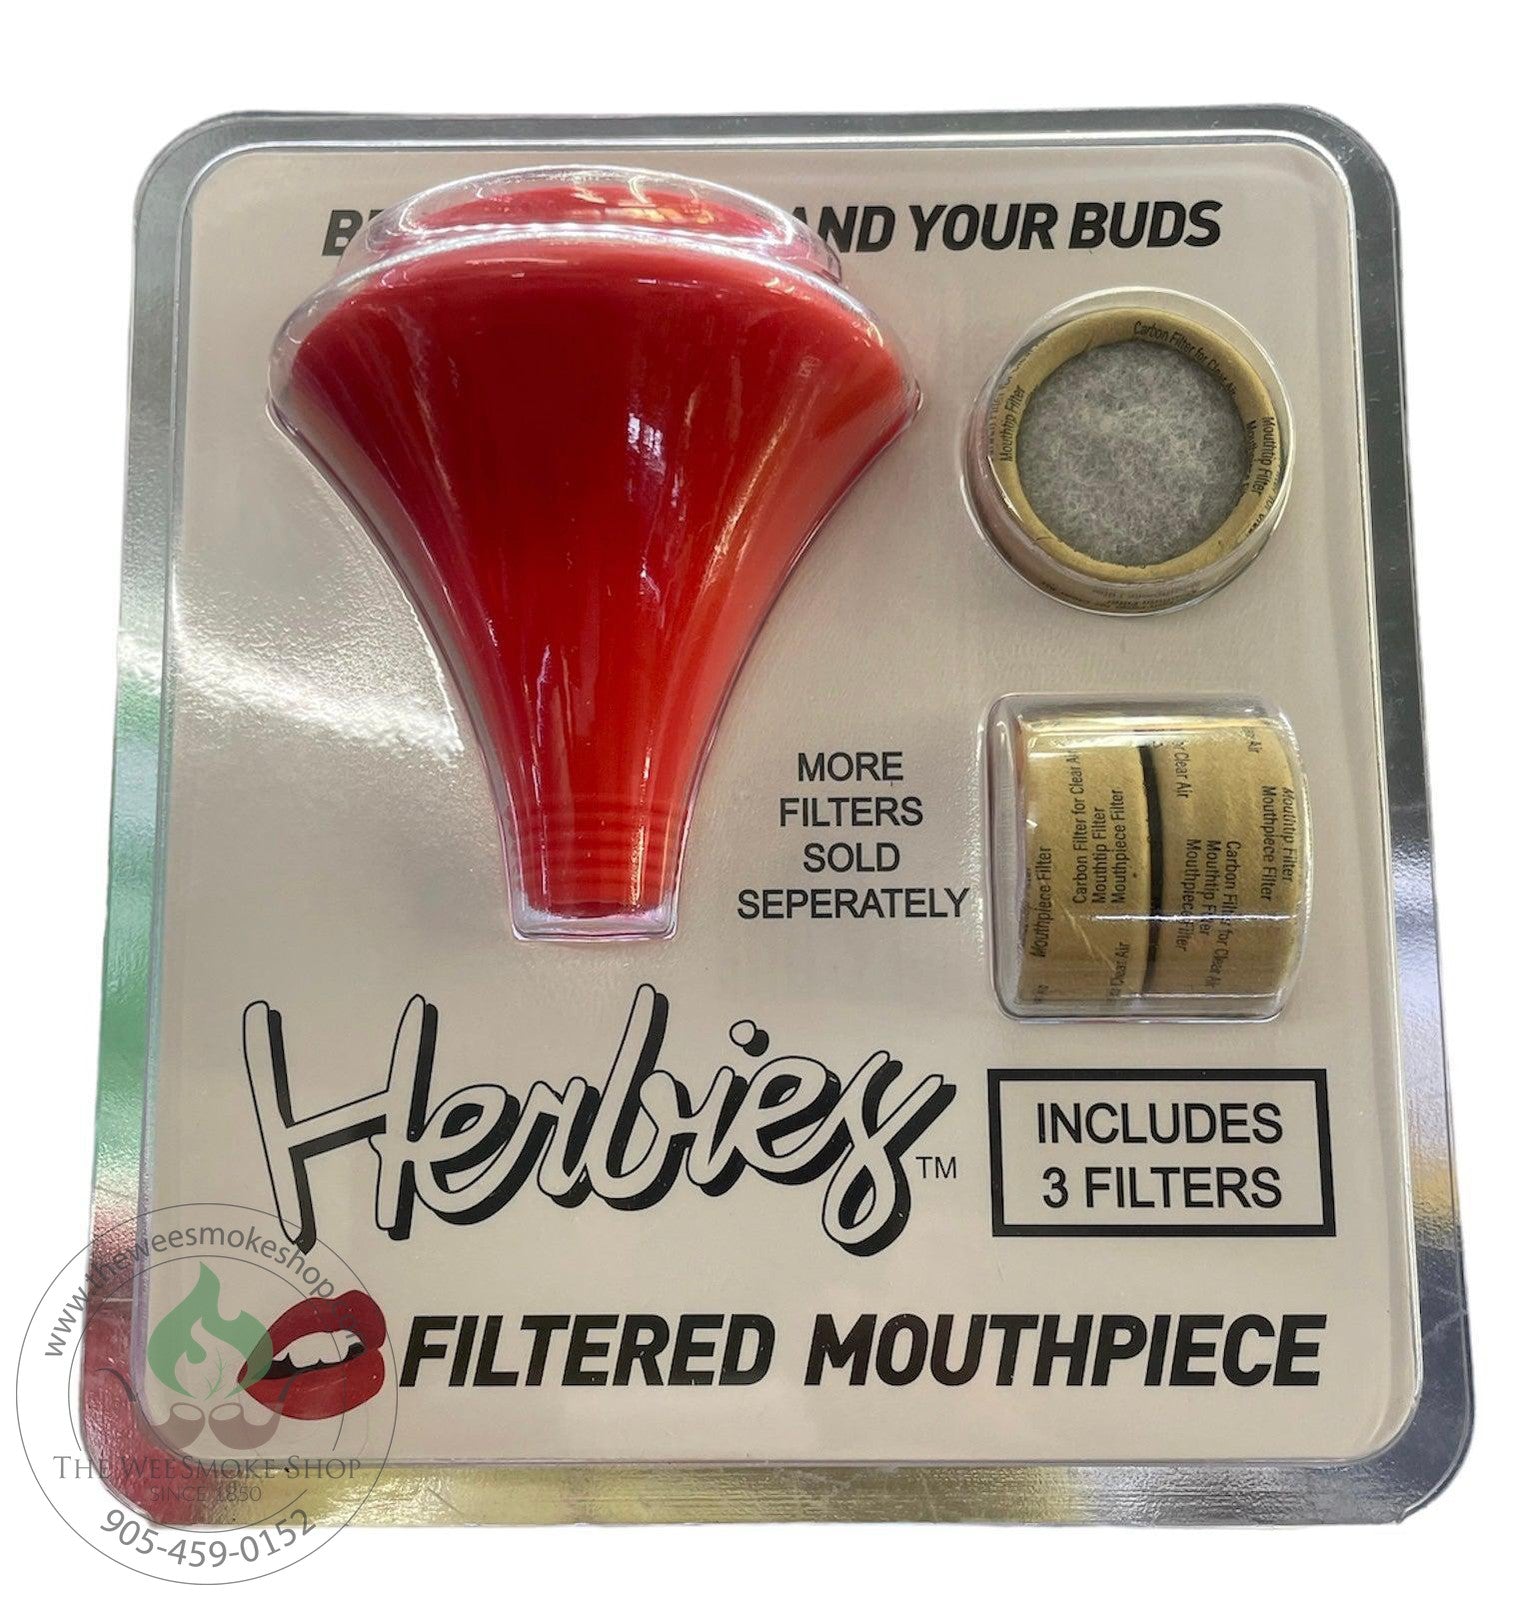 Herbies Filtered Mouthpiece - Red - The Wee Smoke Shop